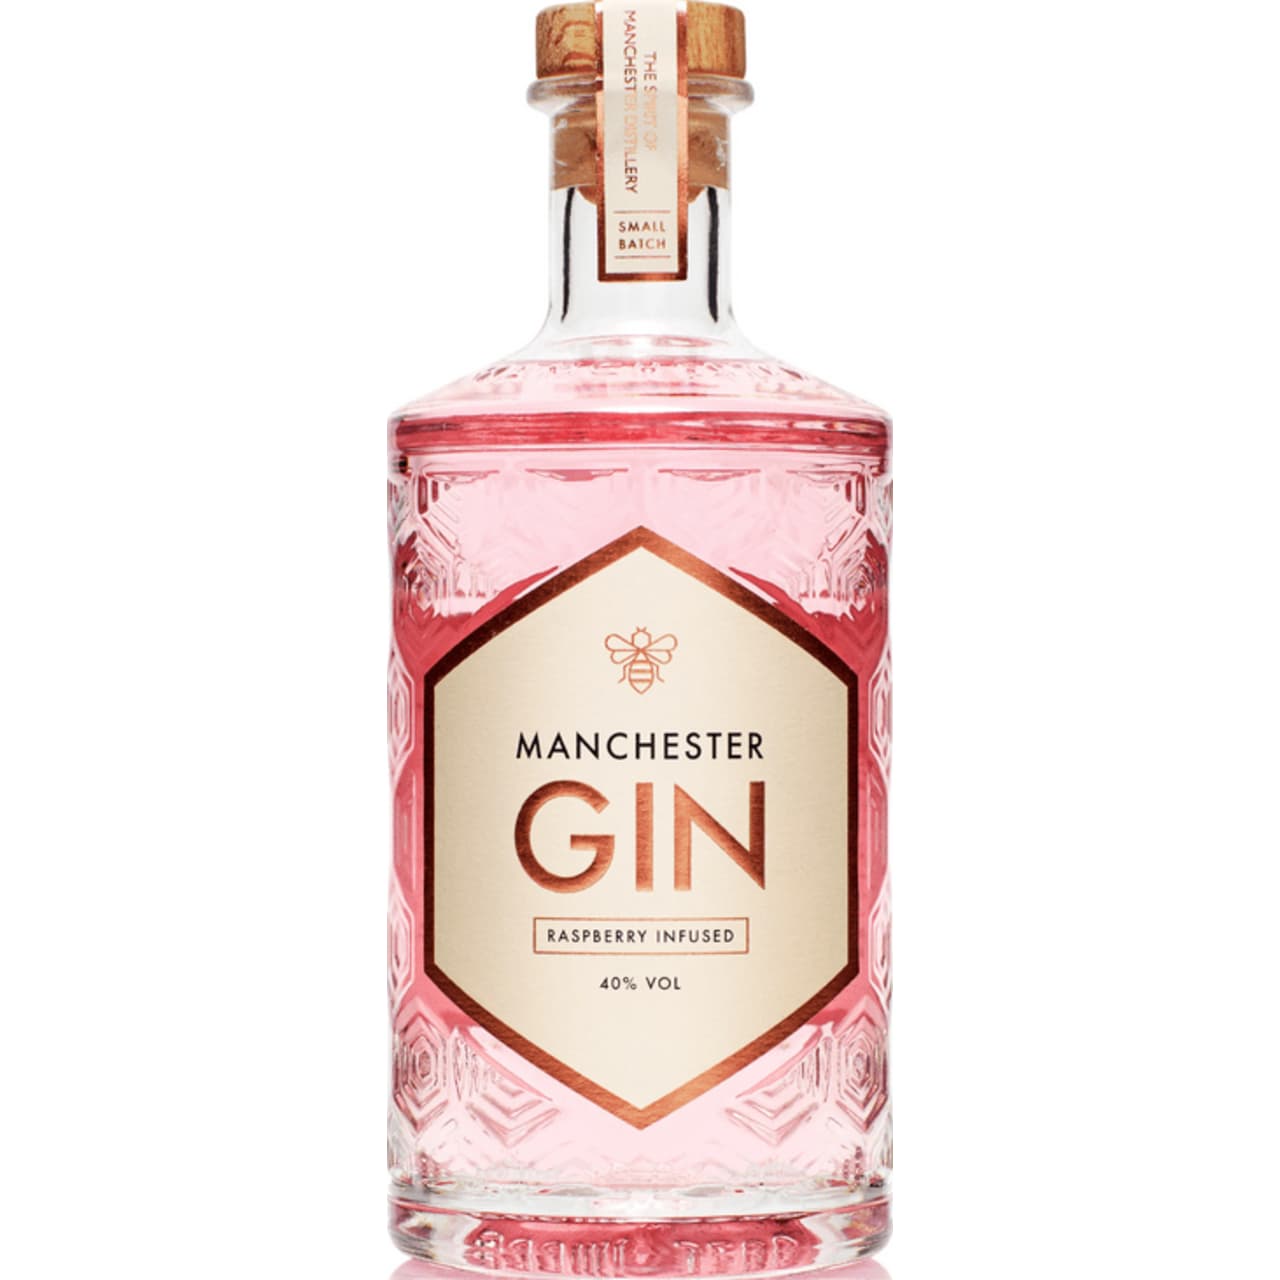 Manchester Raspberry Infused Gin is a soft, dusky take on the Pink Gin trend, with plump raspberries spilling out of the bottle and onto the tongue.